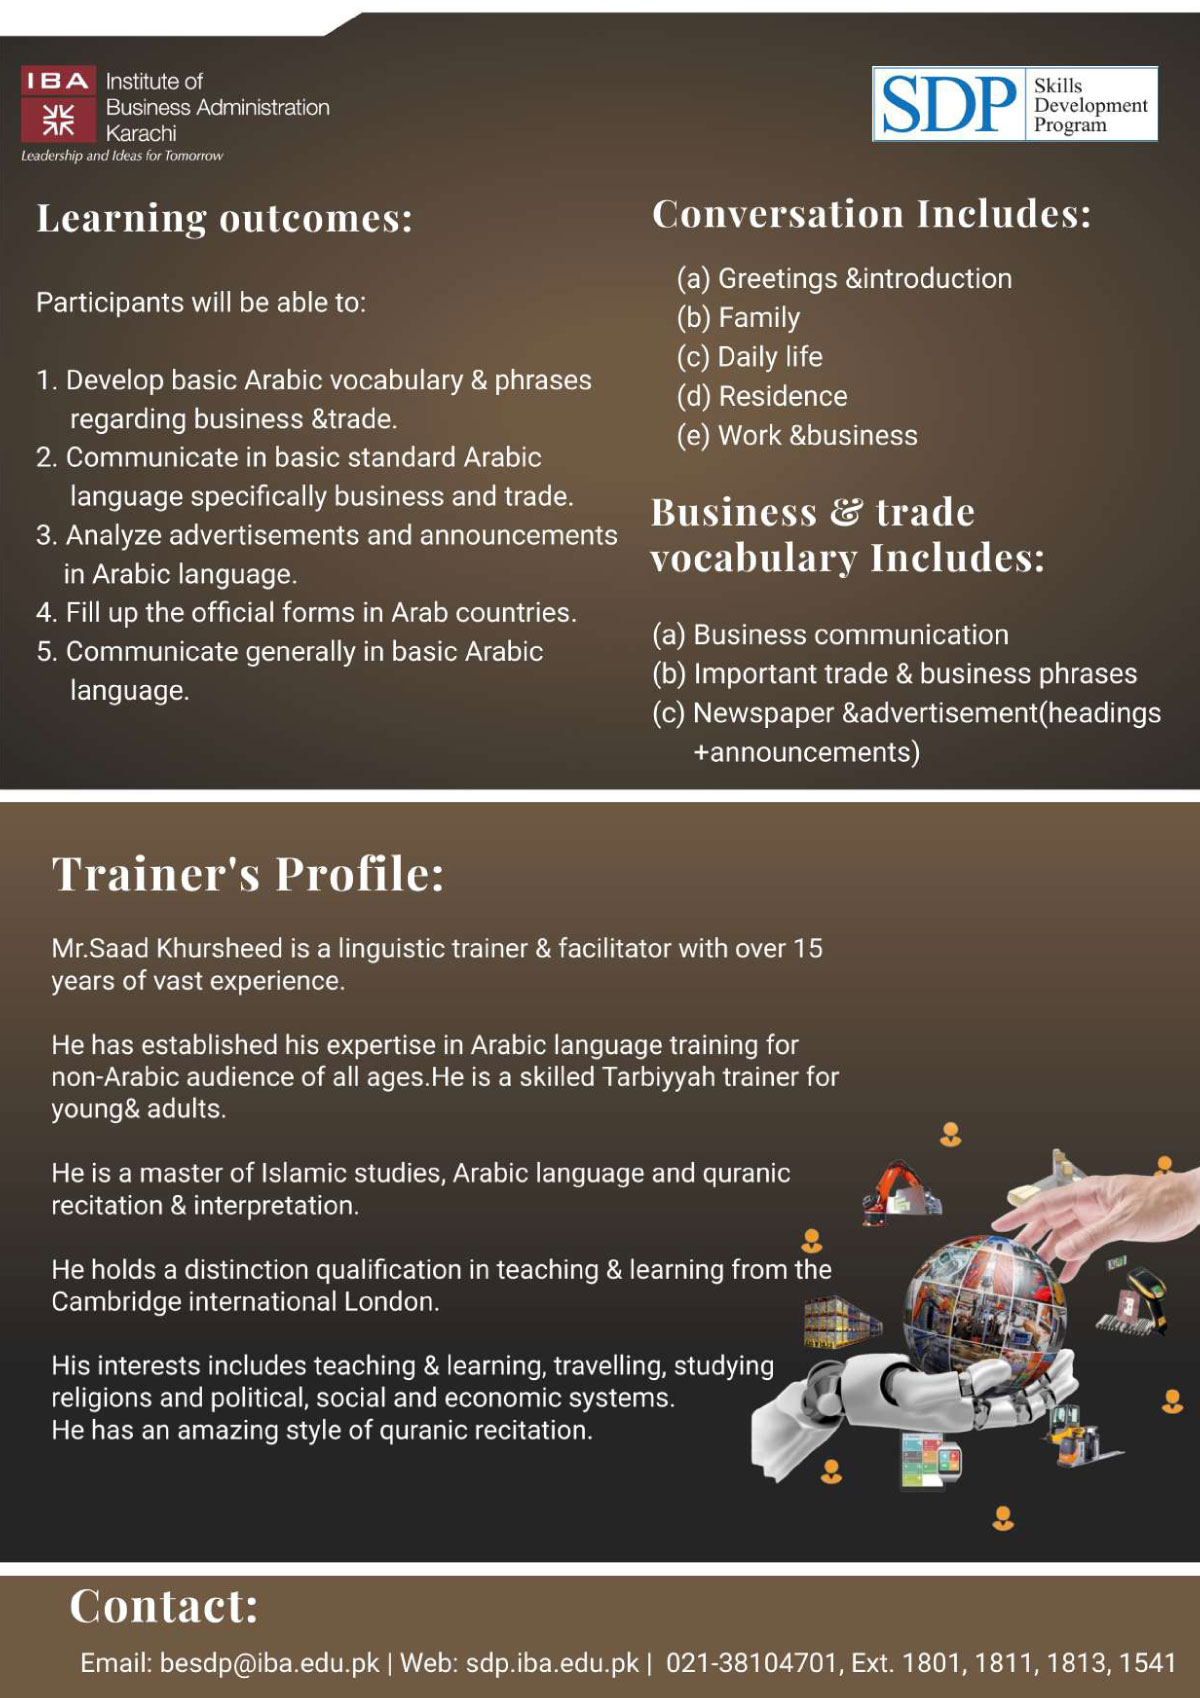 The Arabic Language for Business and Trade